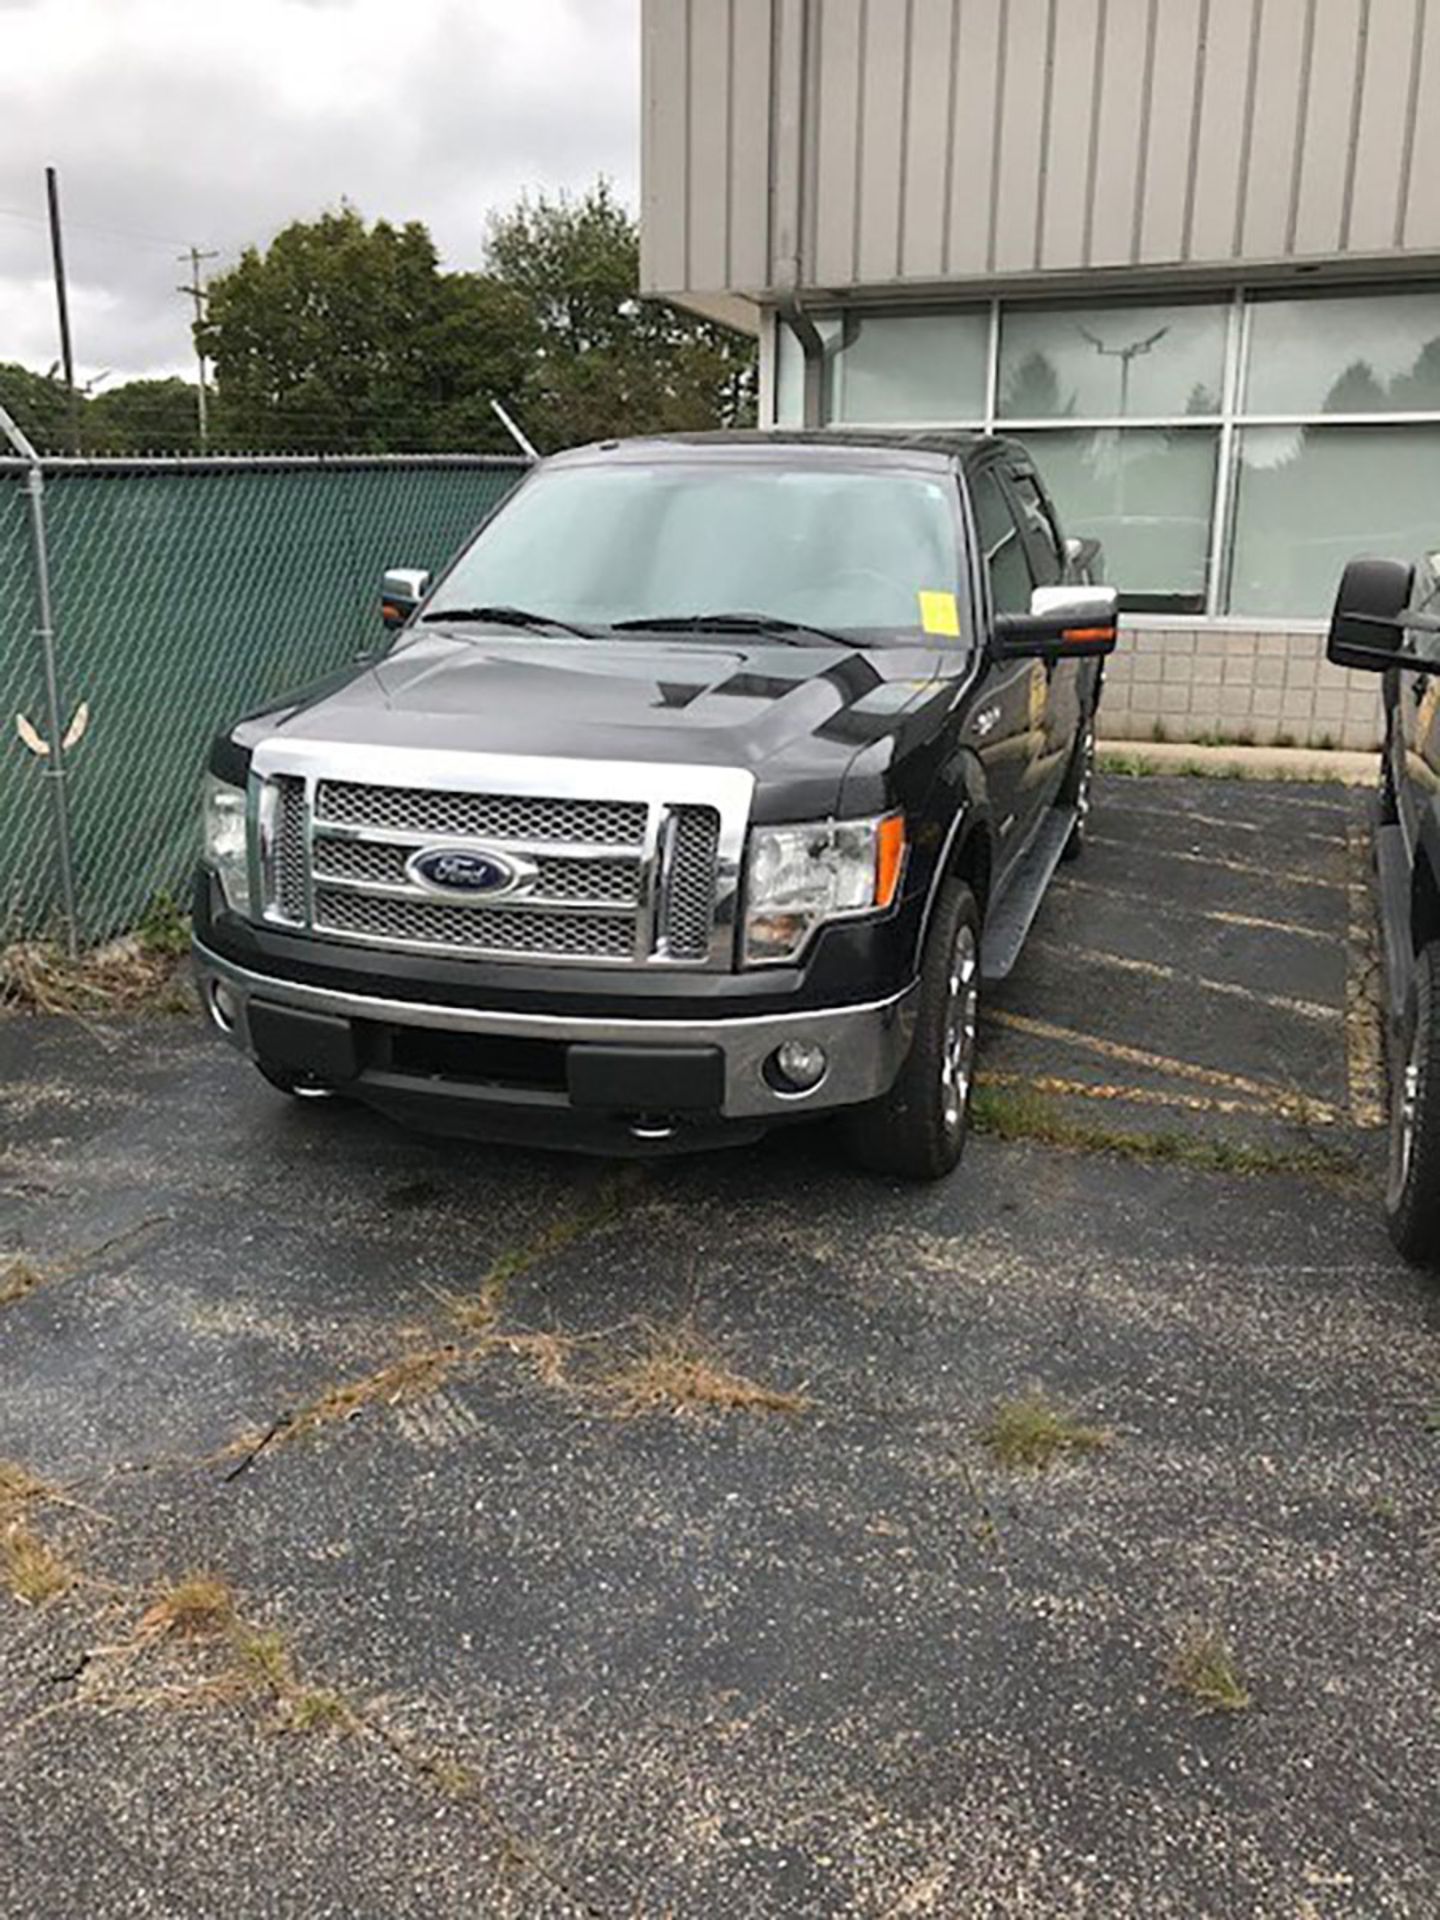 2011 FORD F-150 LARIAT PICKUP TRUCK; CREW CAB, 4-WHEEL DRIVE, SUNROOF, TRUCK BOX WITH TOOLBOX, 3.5